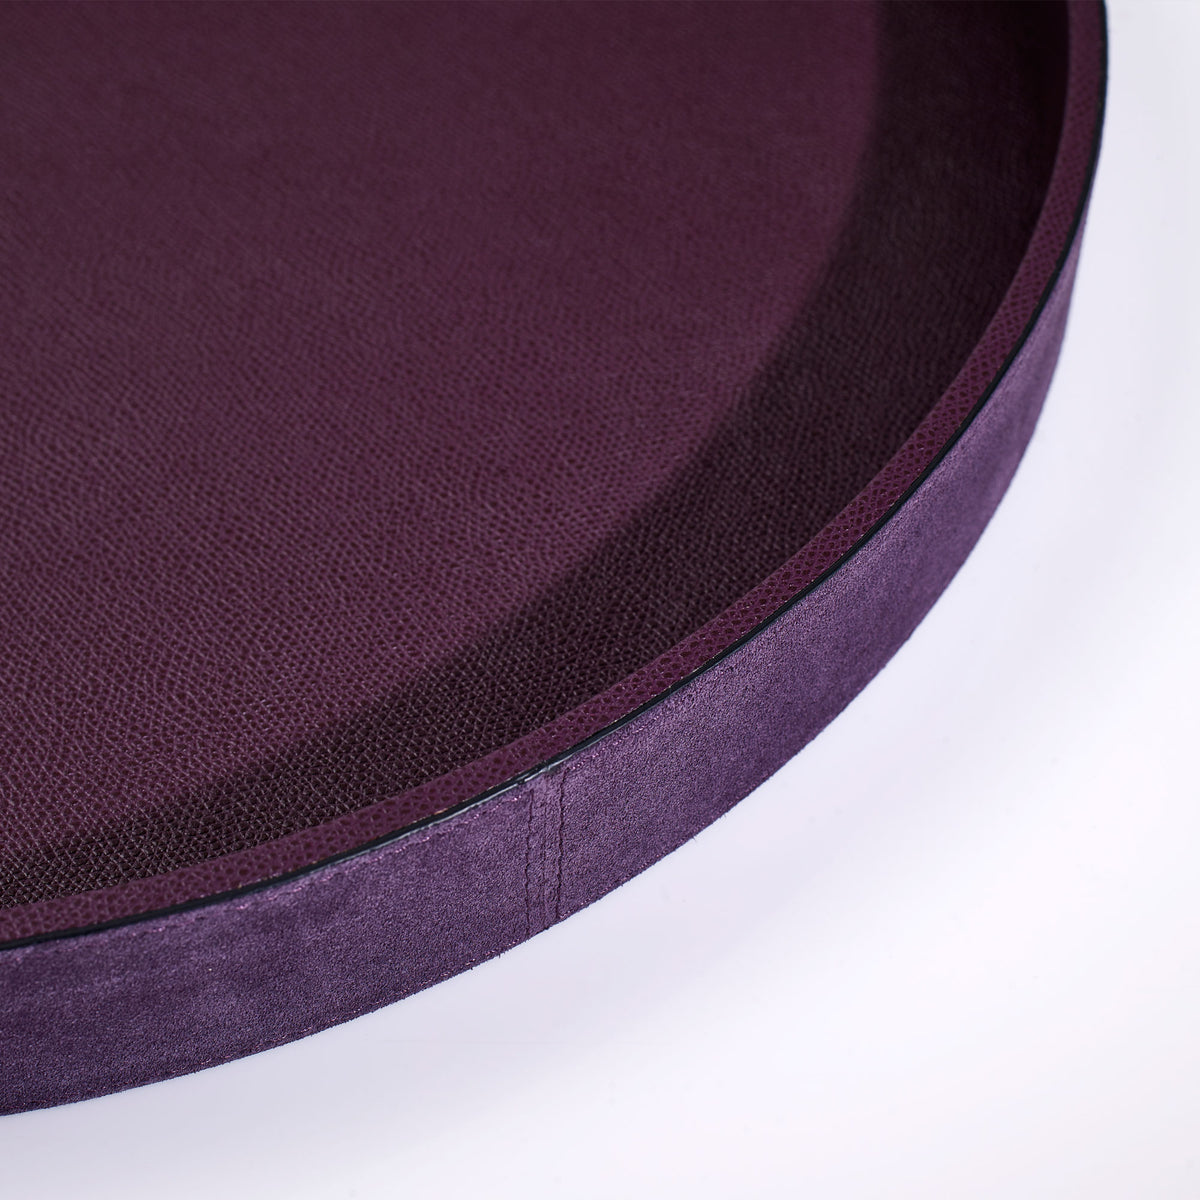 Ebury Suede Tray | Luxury Home Accessories & Gifts | LINLEY